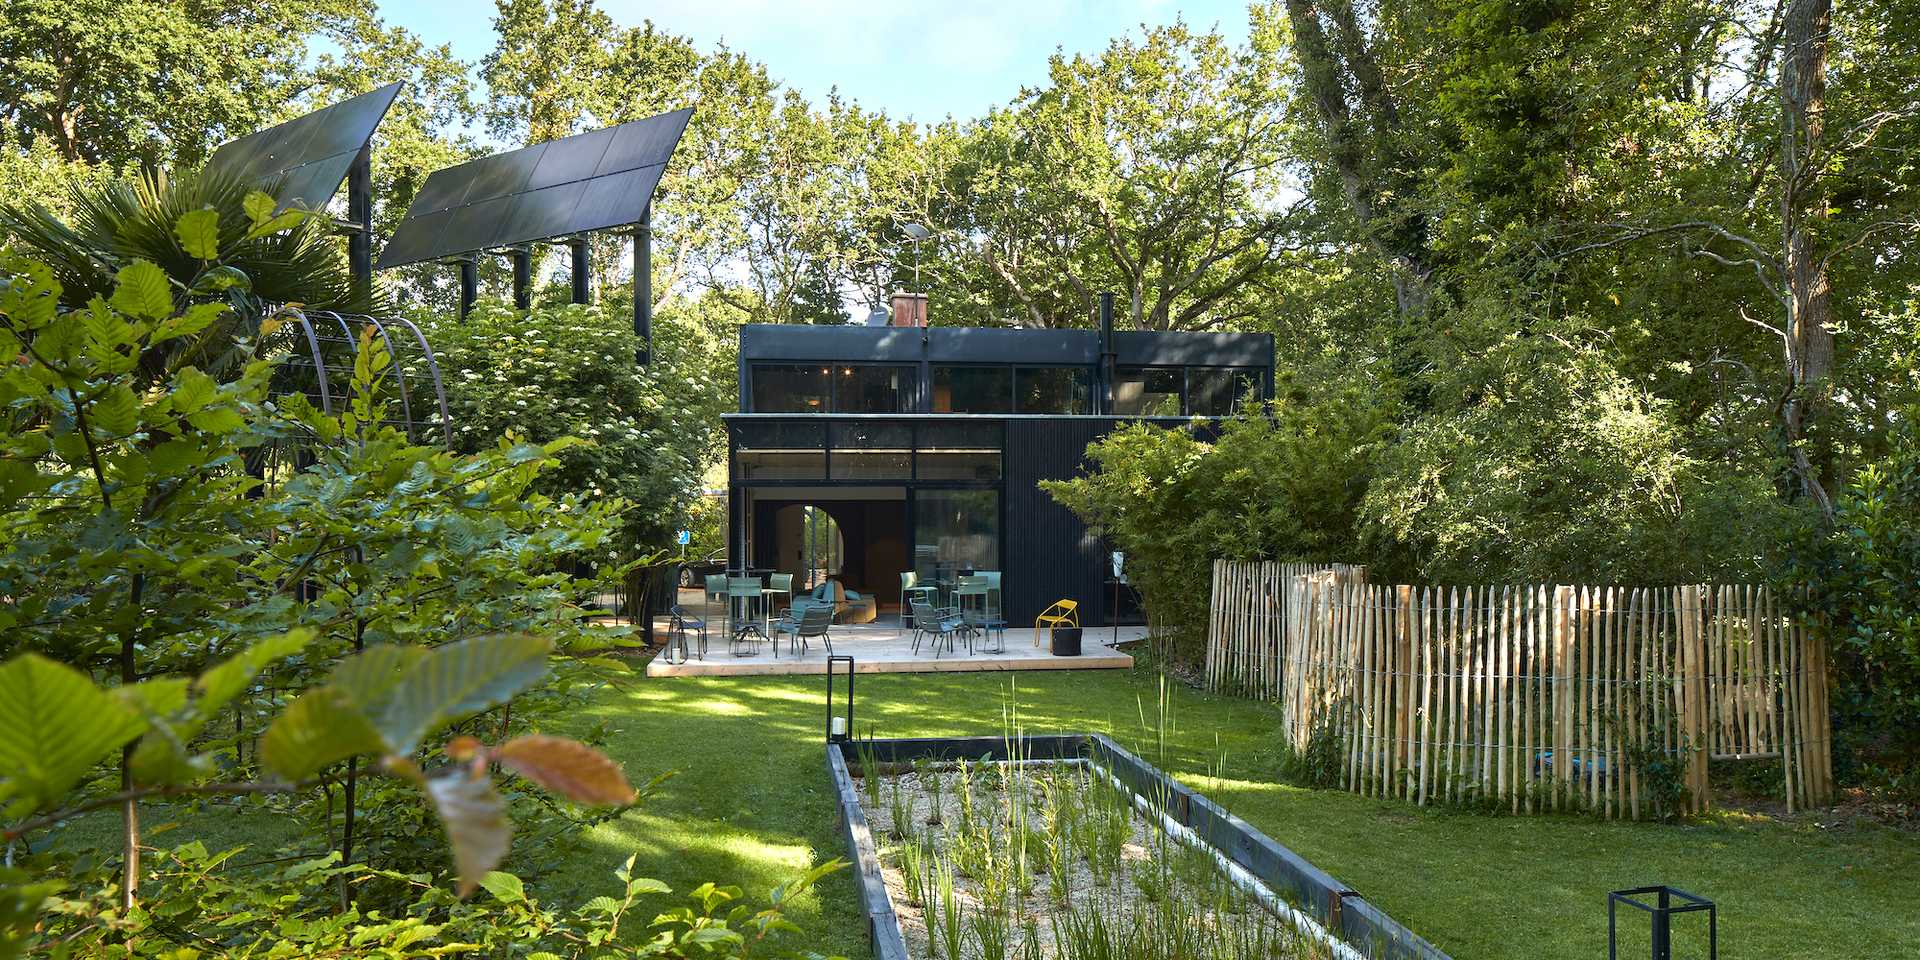 Landscaping of an architect-designed house by a landscaper based in the Nantes metropolitan area